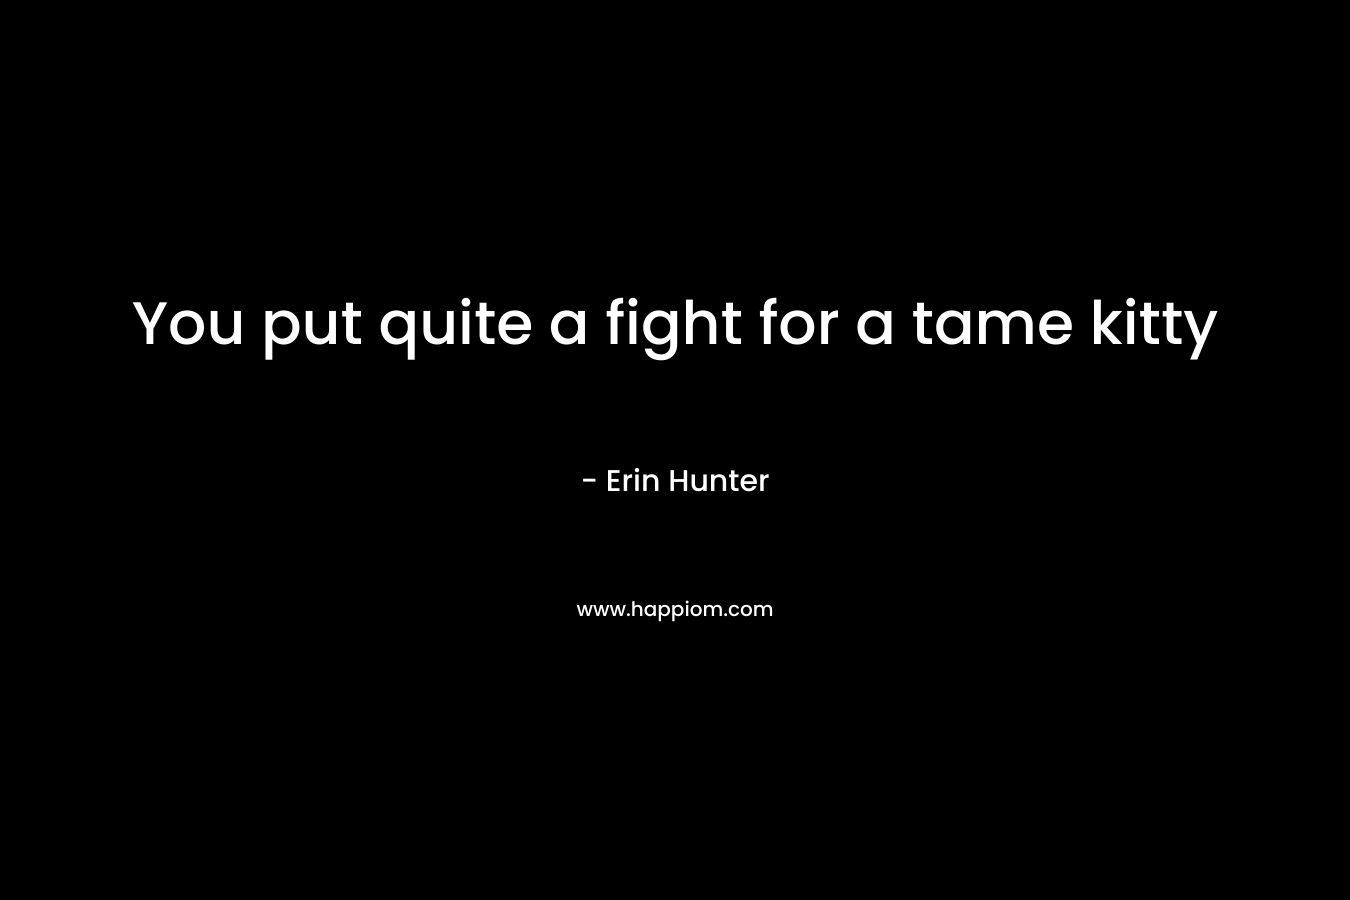 You put quite a fight for a tame kitty – Erin Hunter